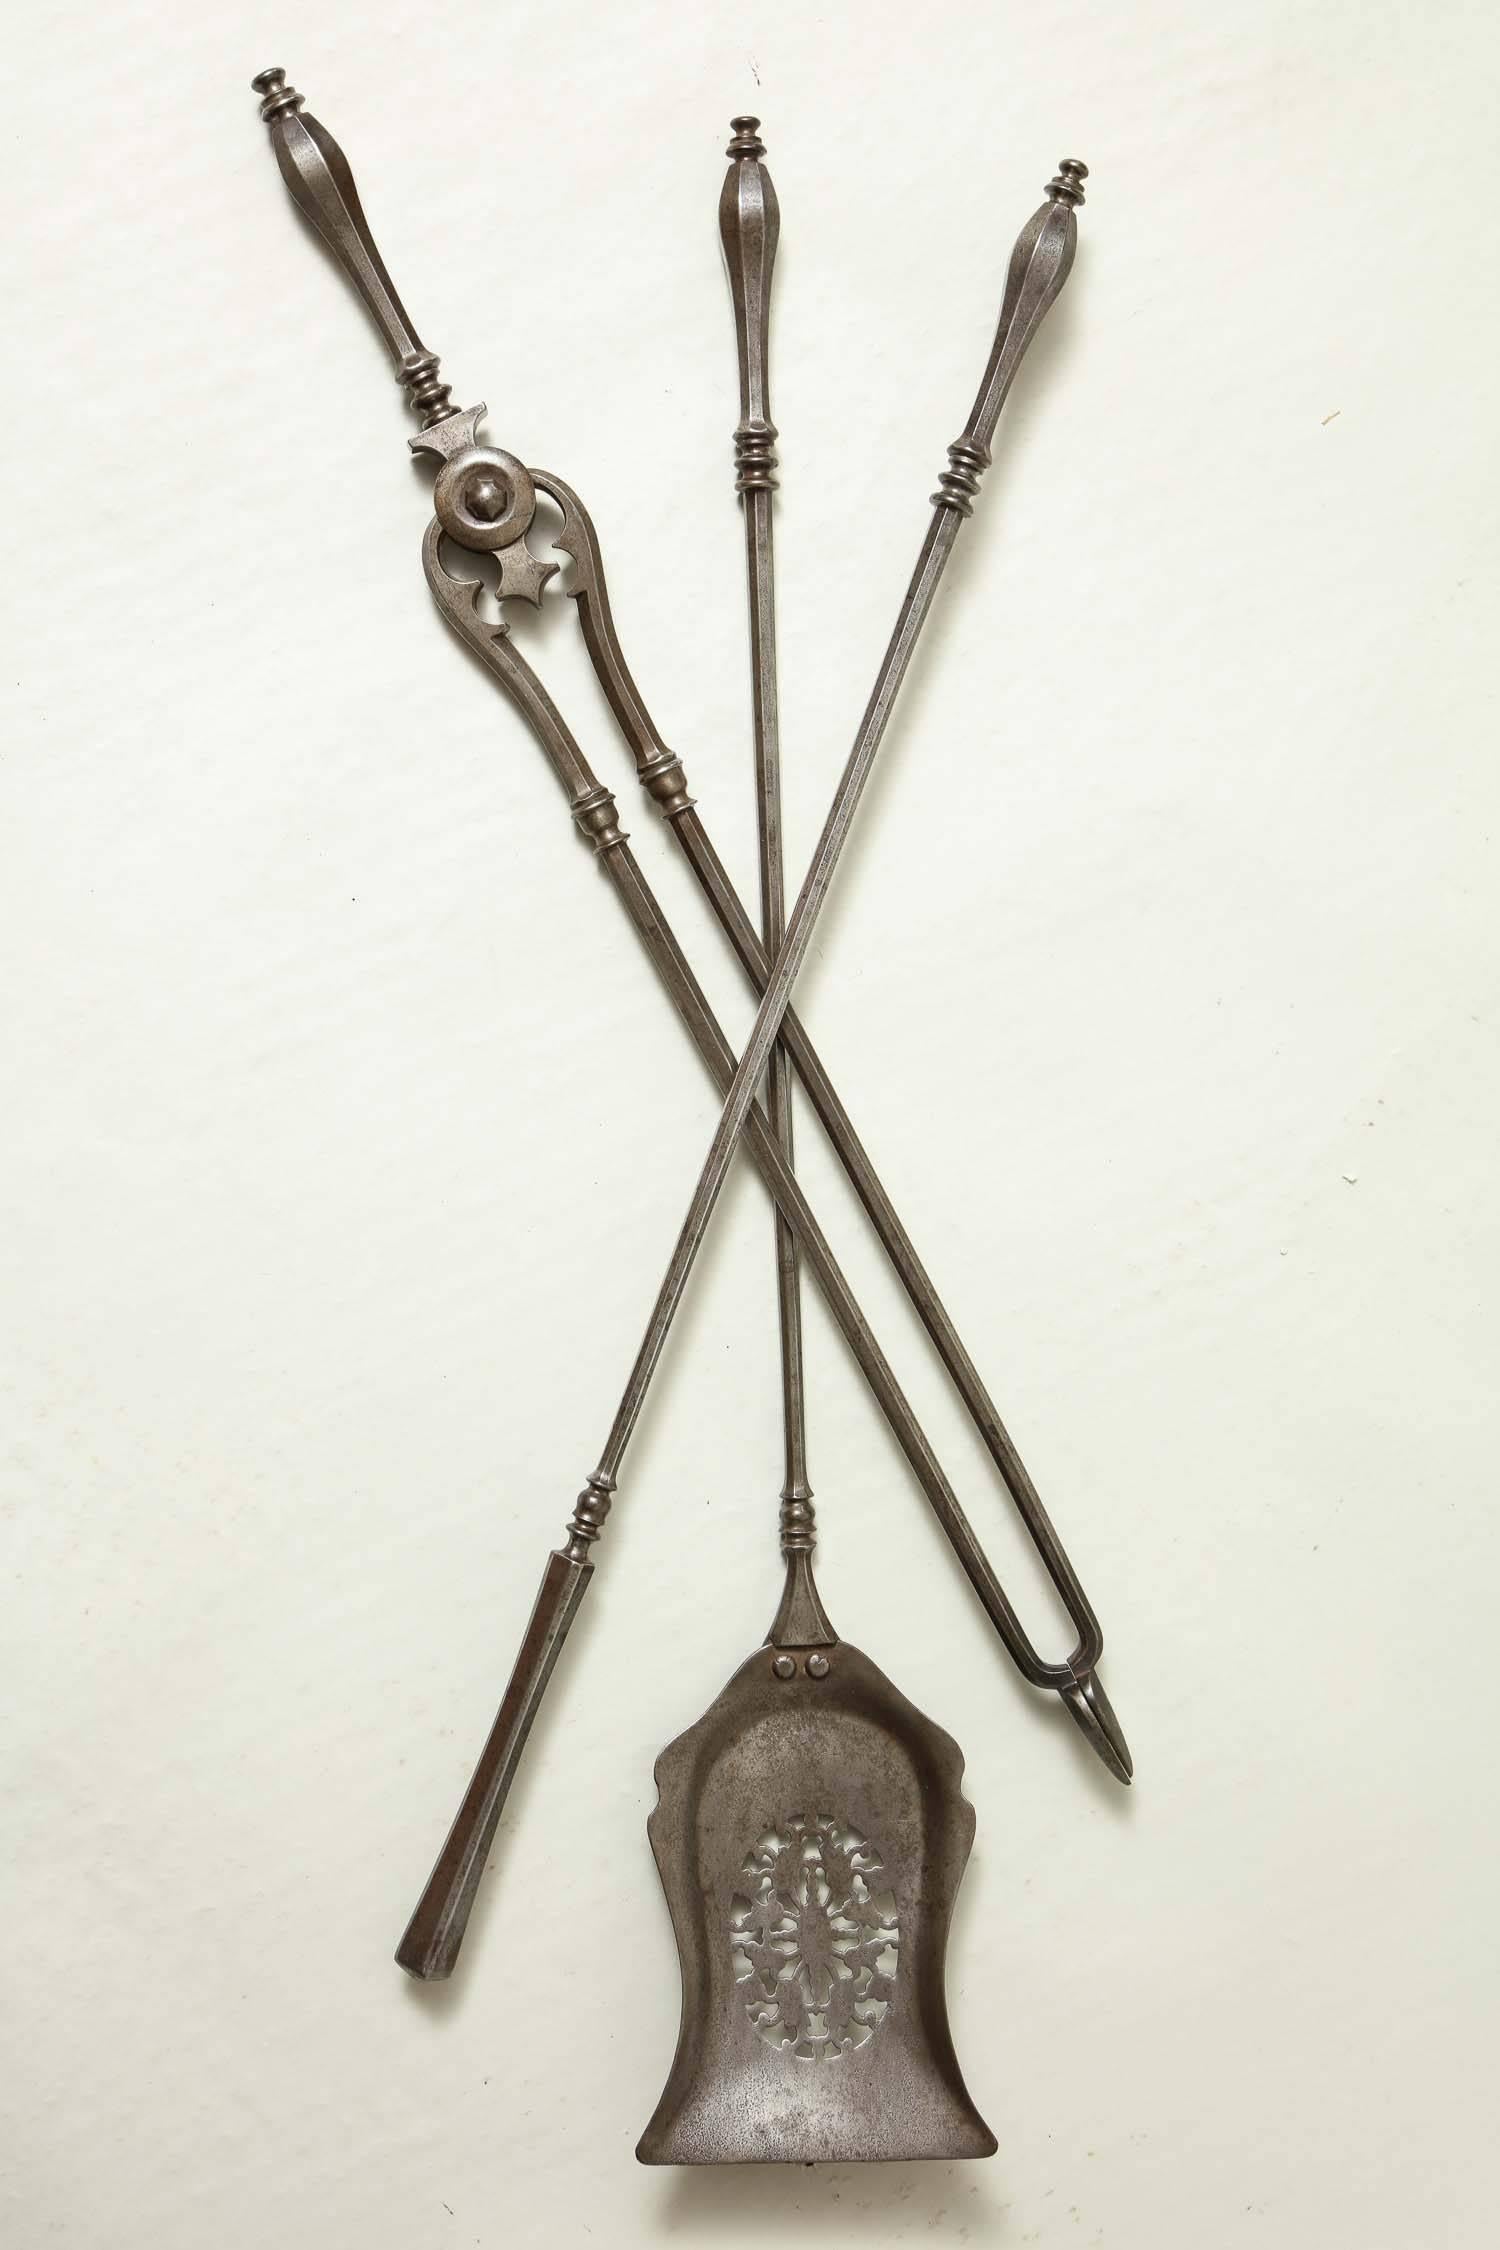 Fine set of 19th century steel fire tools comprising a pierced shovel, poker and pair of tongs, the former with oval paterea and foliate design, all with octagonal tear drop handles and octagonal shafts and with nicely patinated surface.